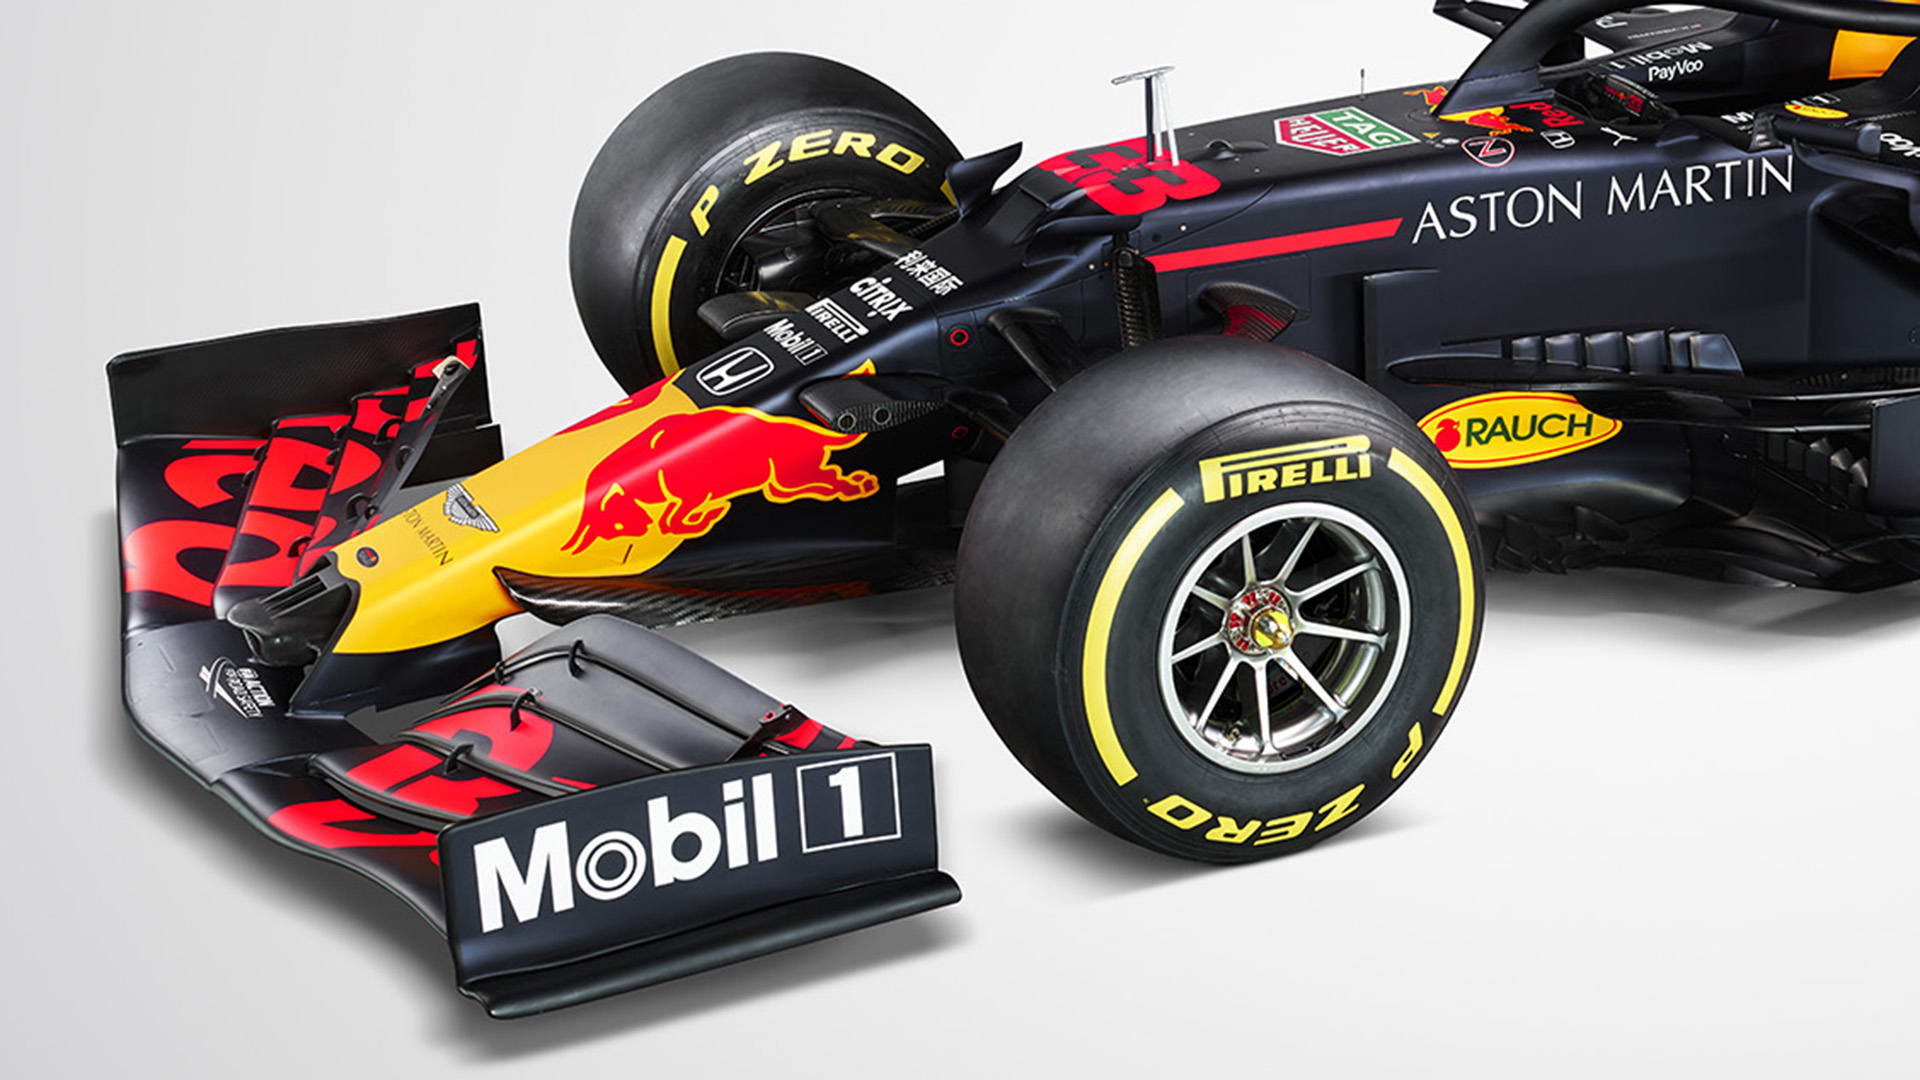 REACTION: Our first take on Red Bull's Formula 1®